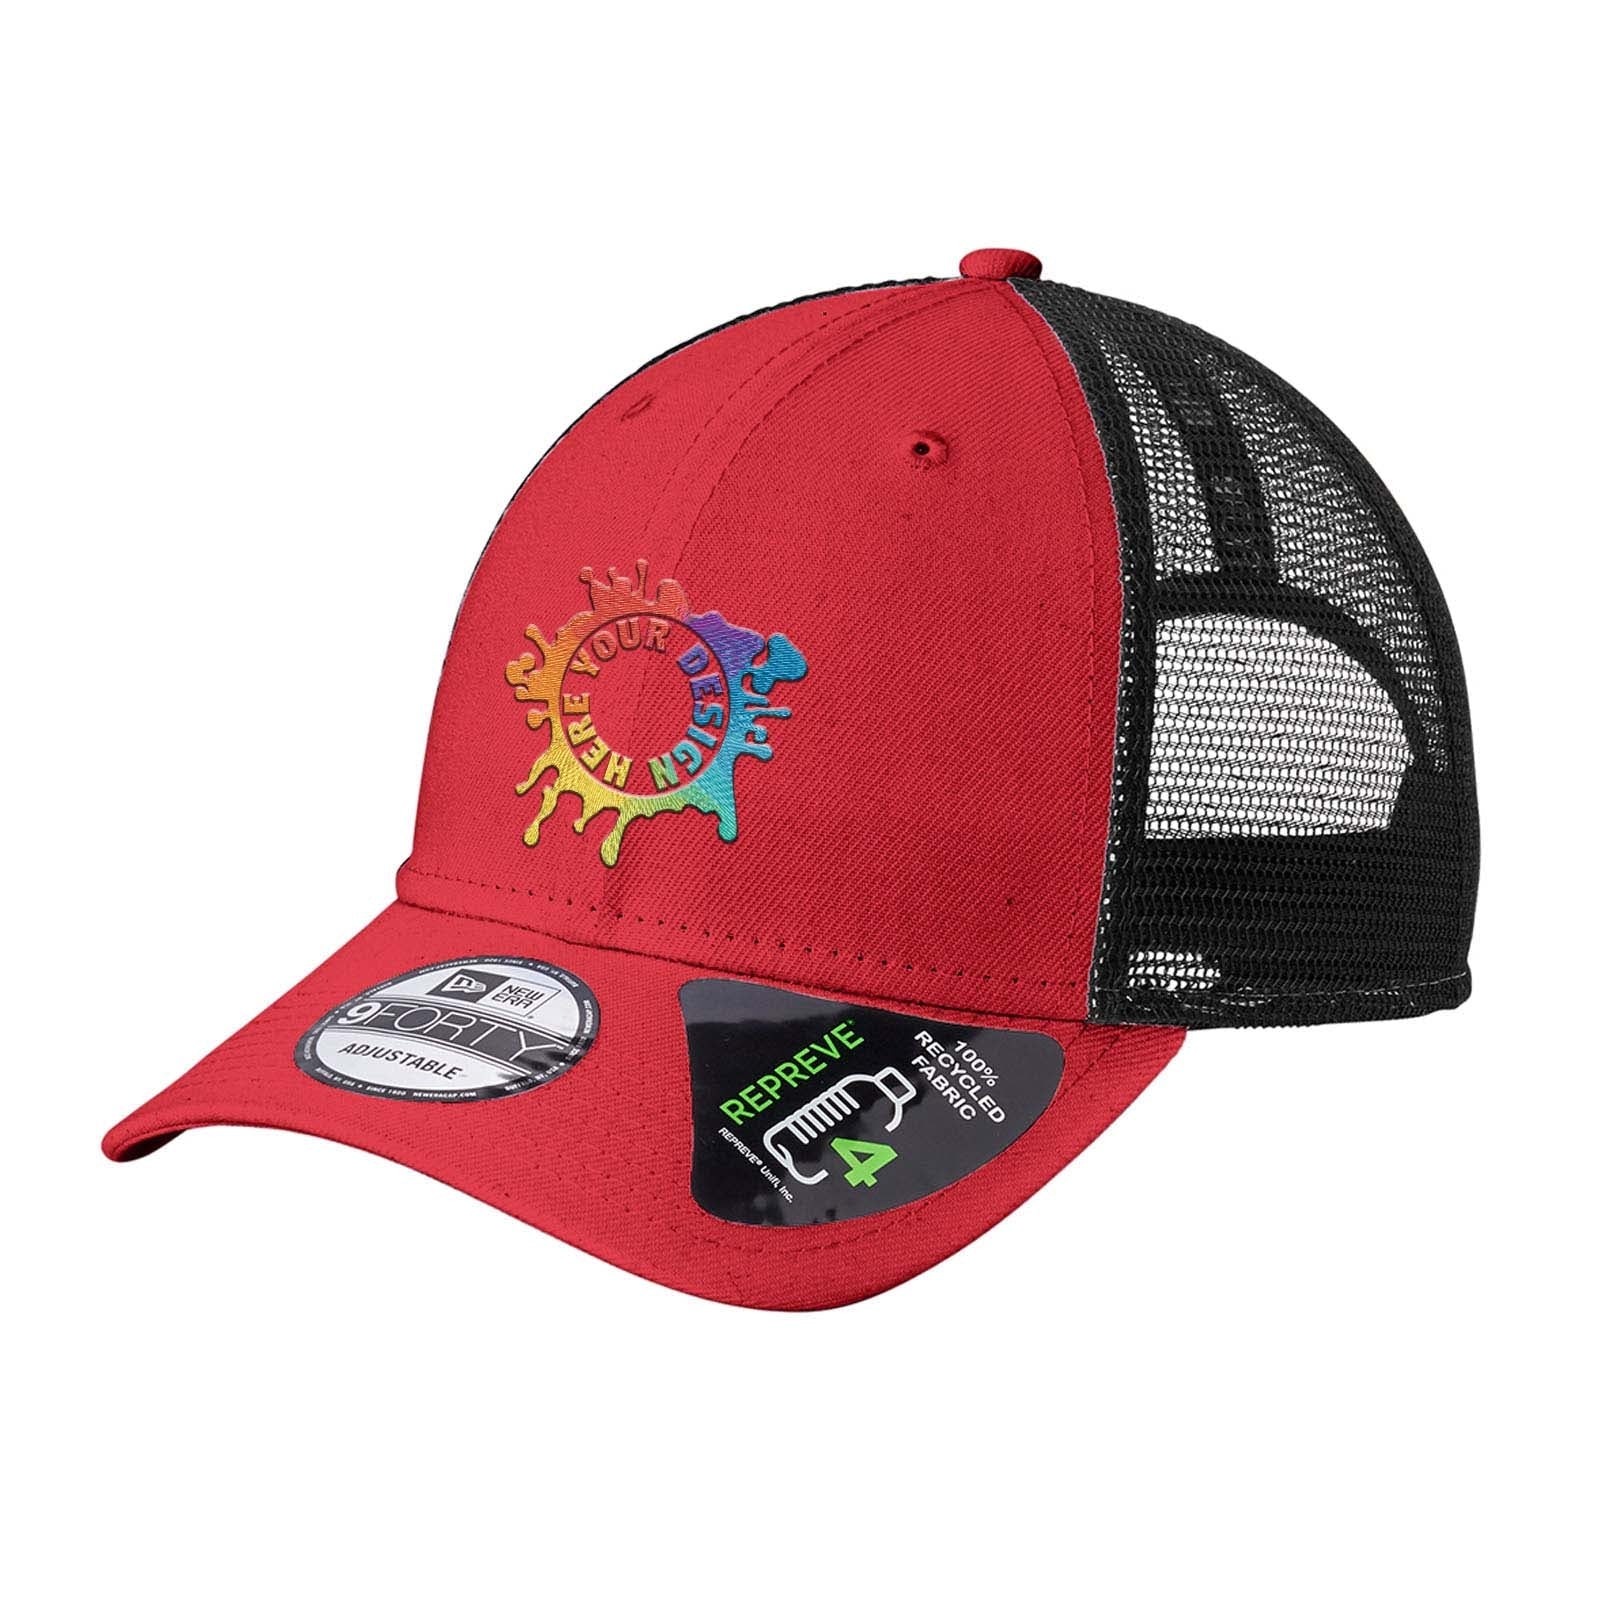 Embroidered New Era® Recycled Snapback Cap